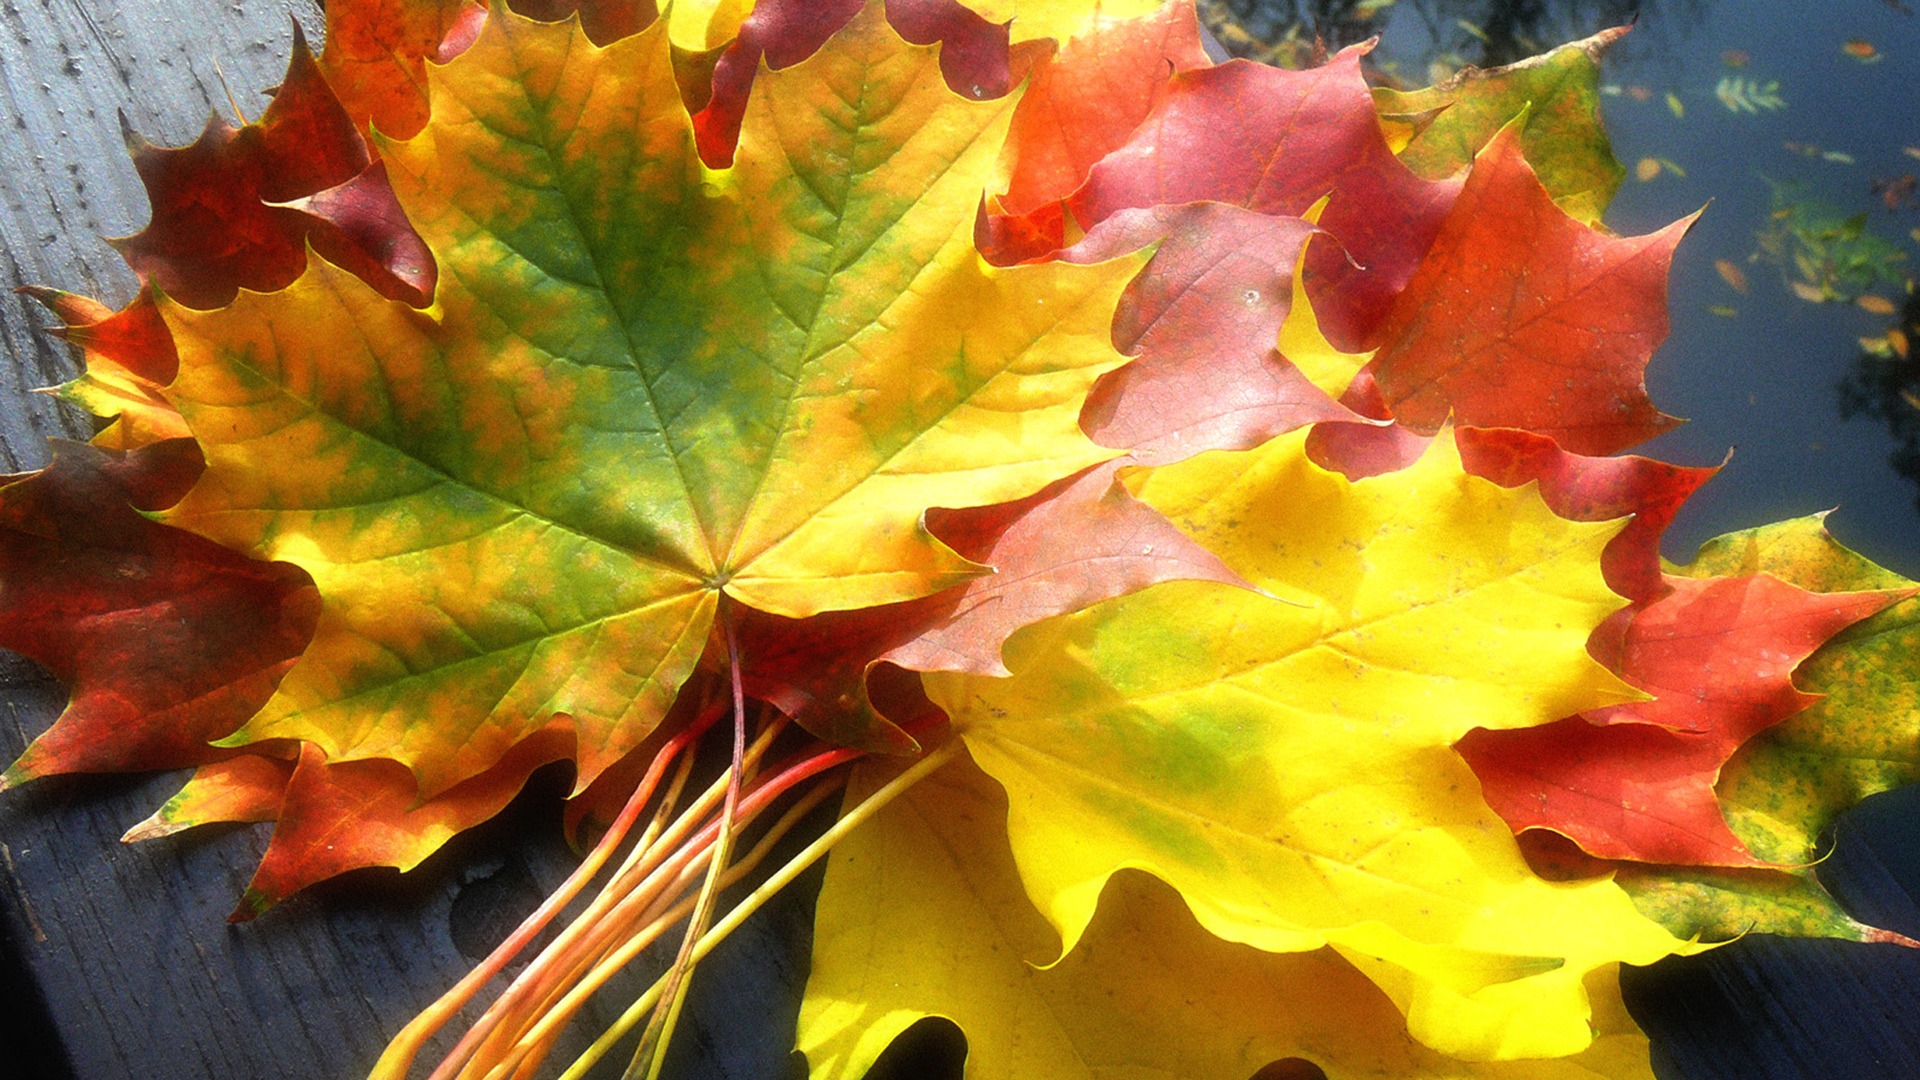 Fall Leaves Wallpaper Autumn Nature Wallpapers in jpg format for